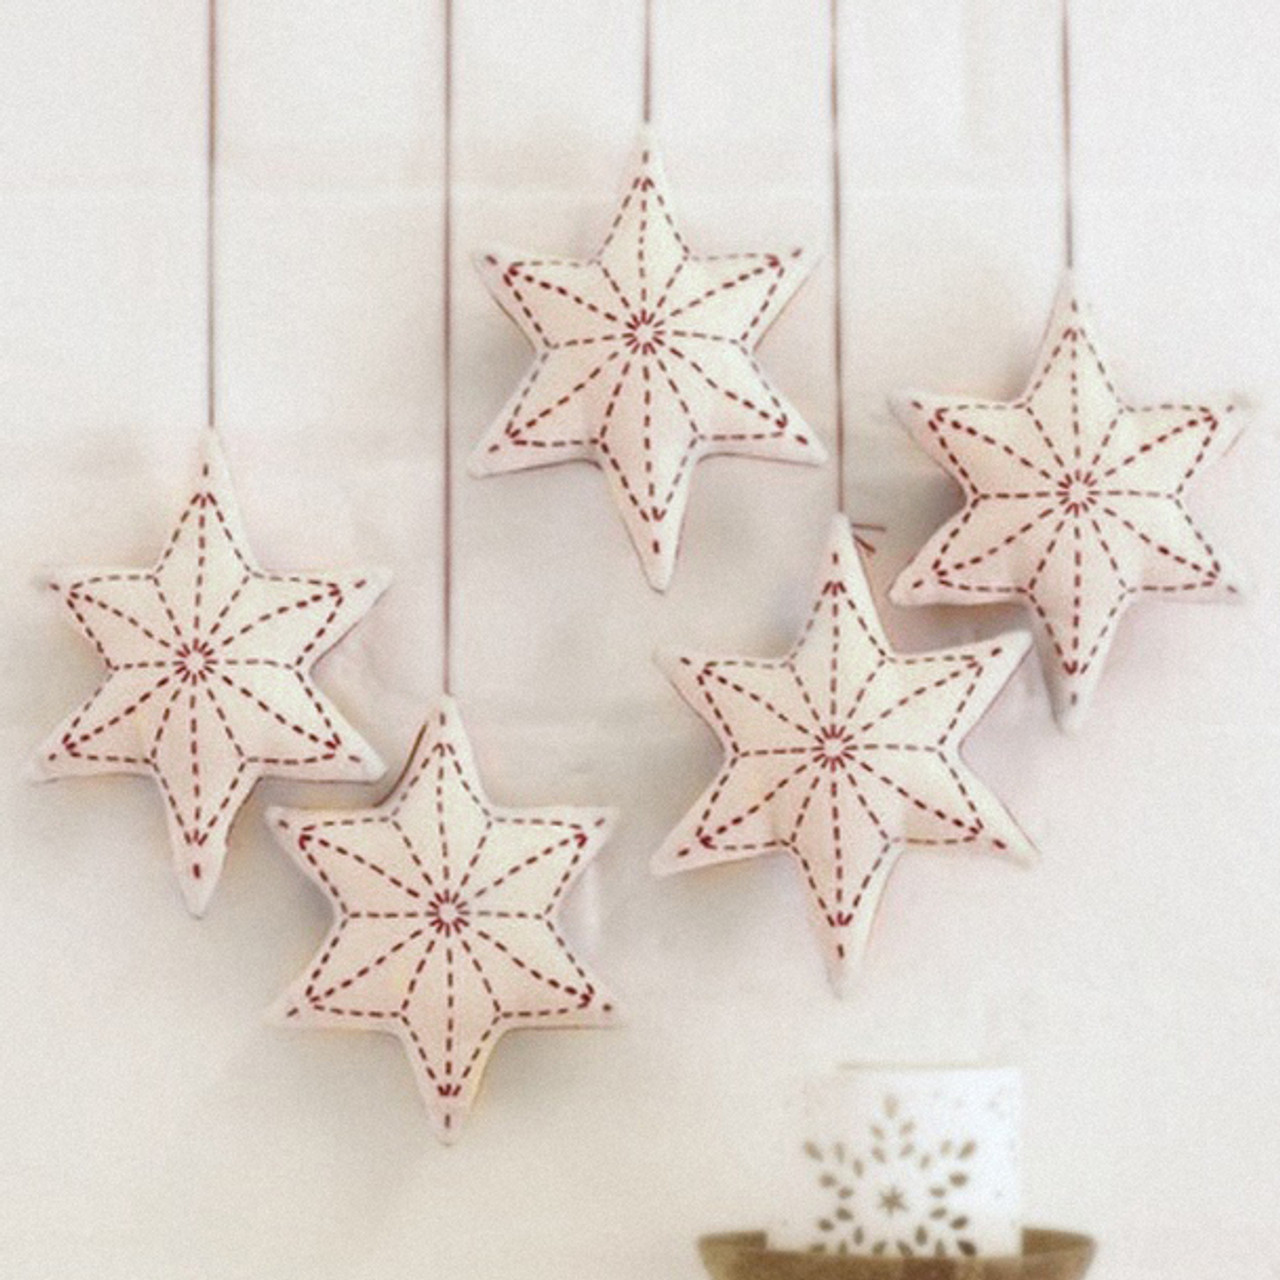 Easy Cross Stitch Folded Star Ornaments - Pattern - Electronic Download